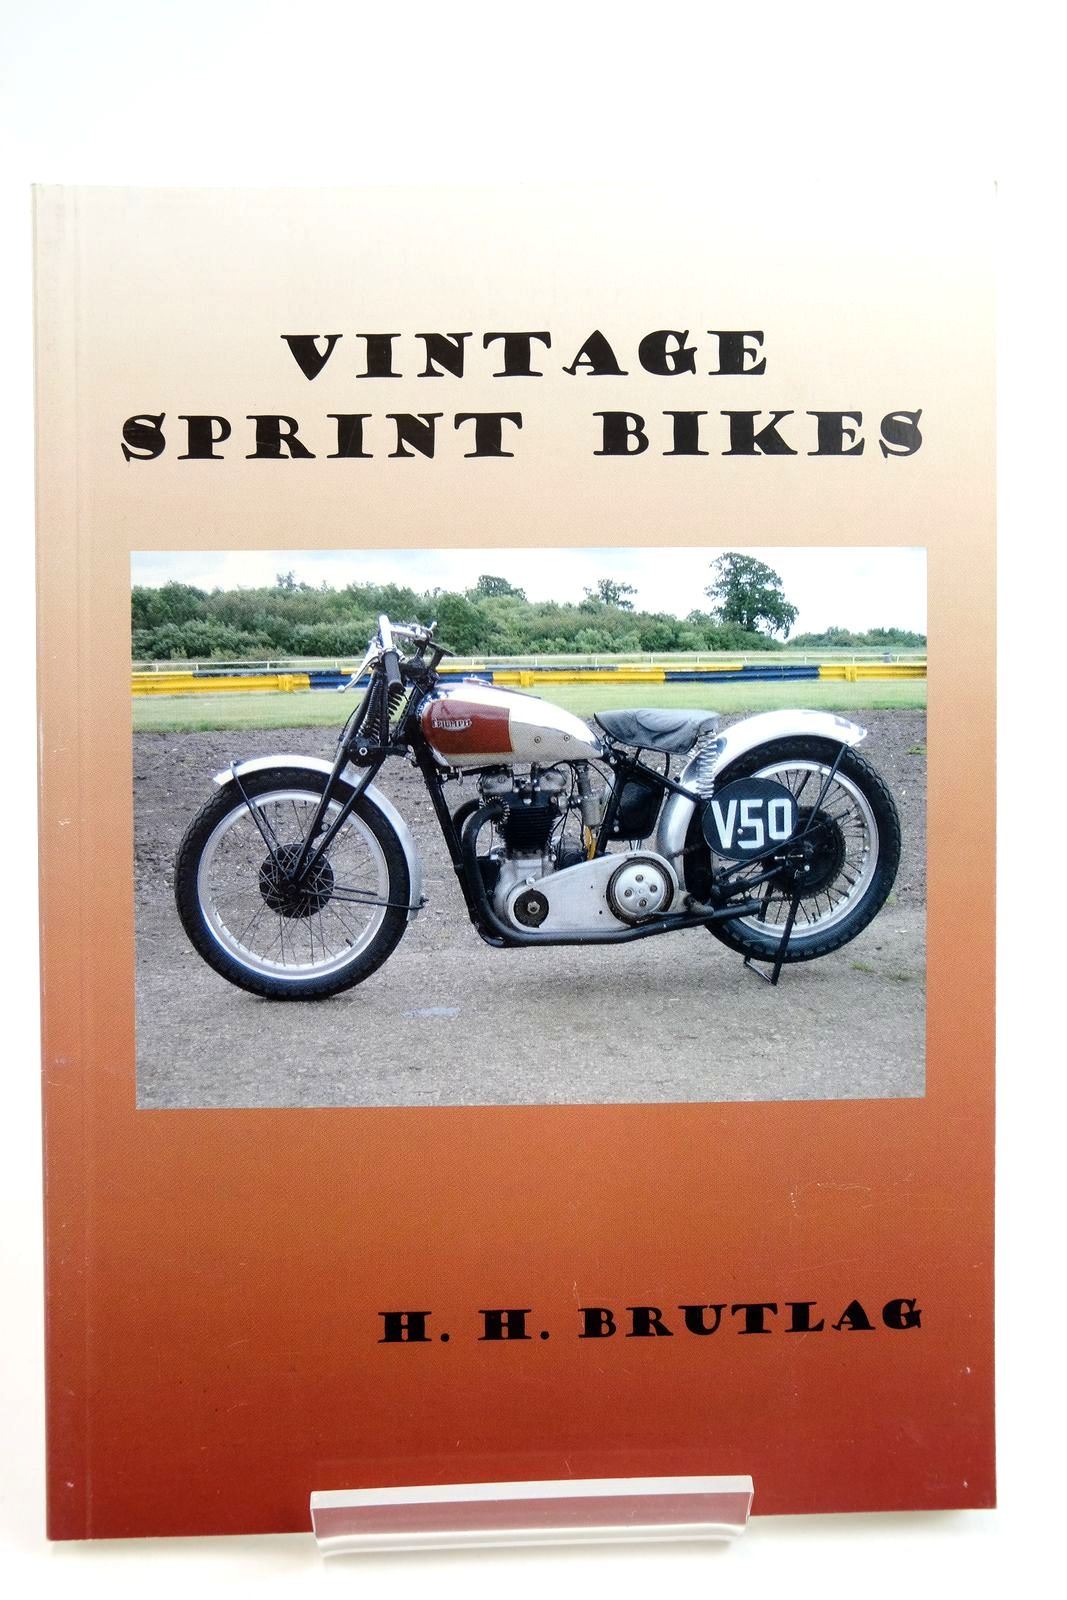 Photo of VINTAGE SPRINT BIKES written by Brutlag, H.H. published by Rennsport Sidecars (STOCK CODE: 2135201)  for sale by Stella & Rose's Books